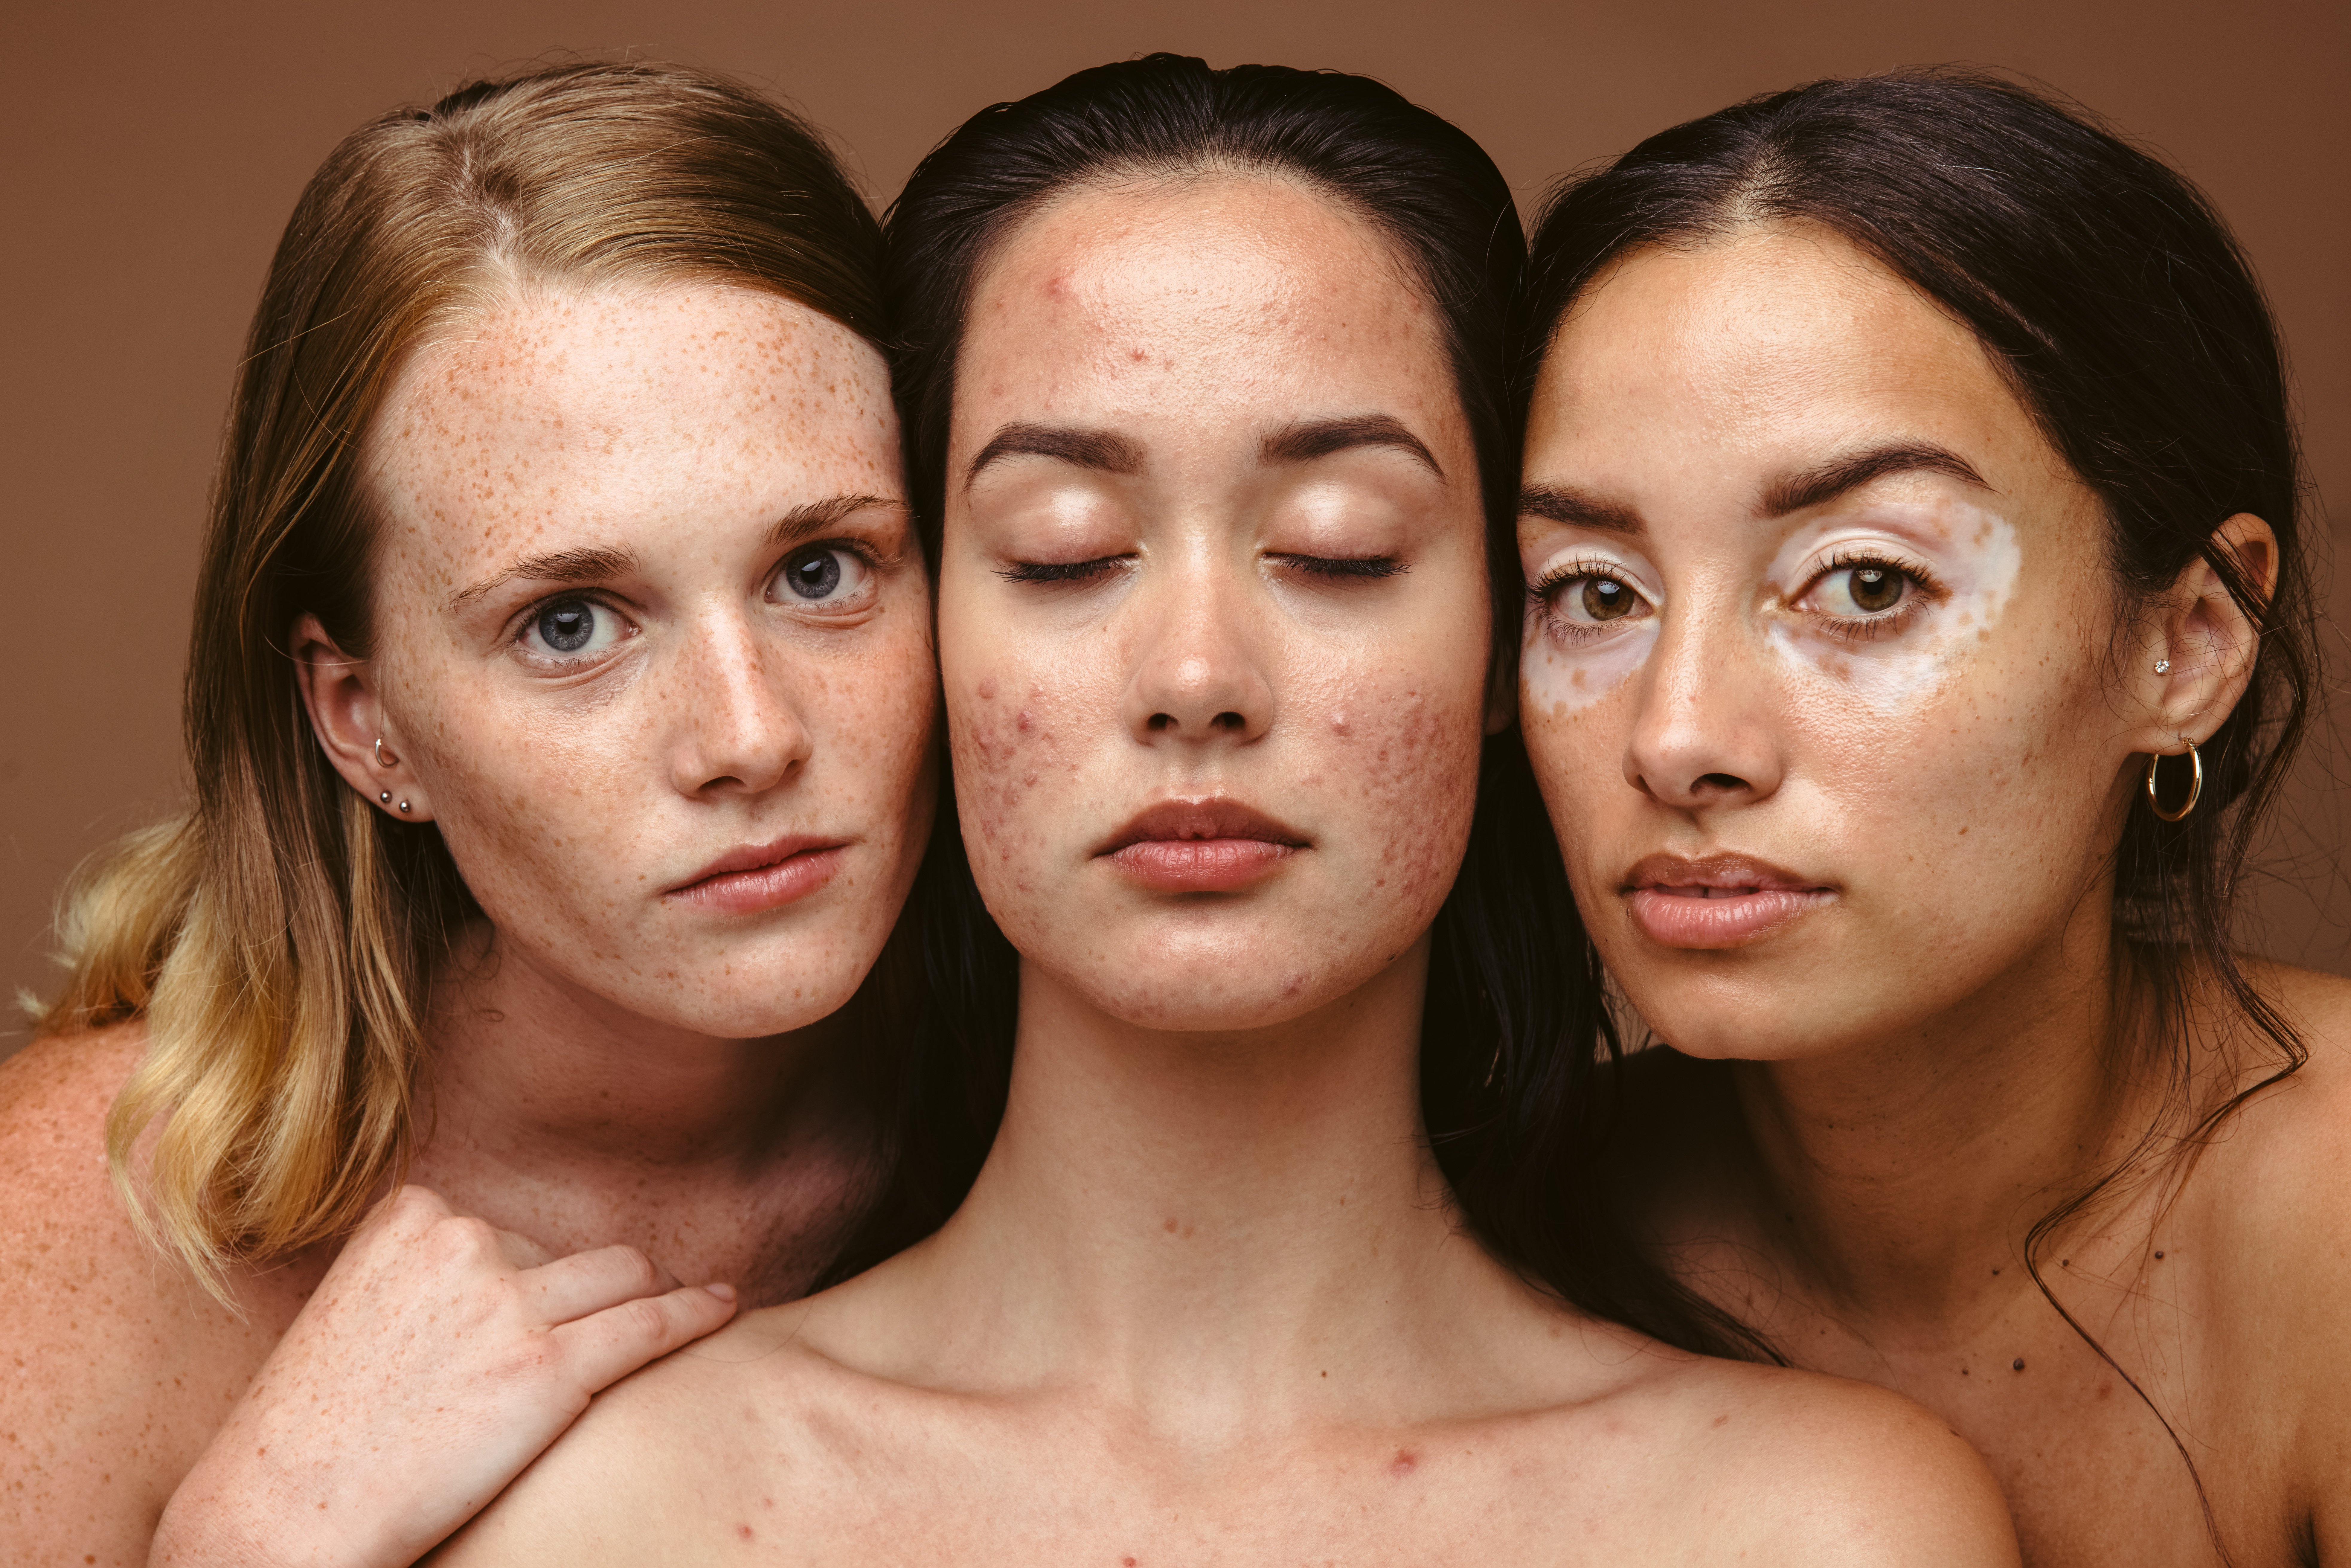 Three models with acne outbreaks. | Source: Shutterstock